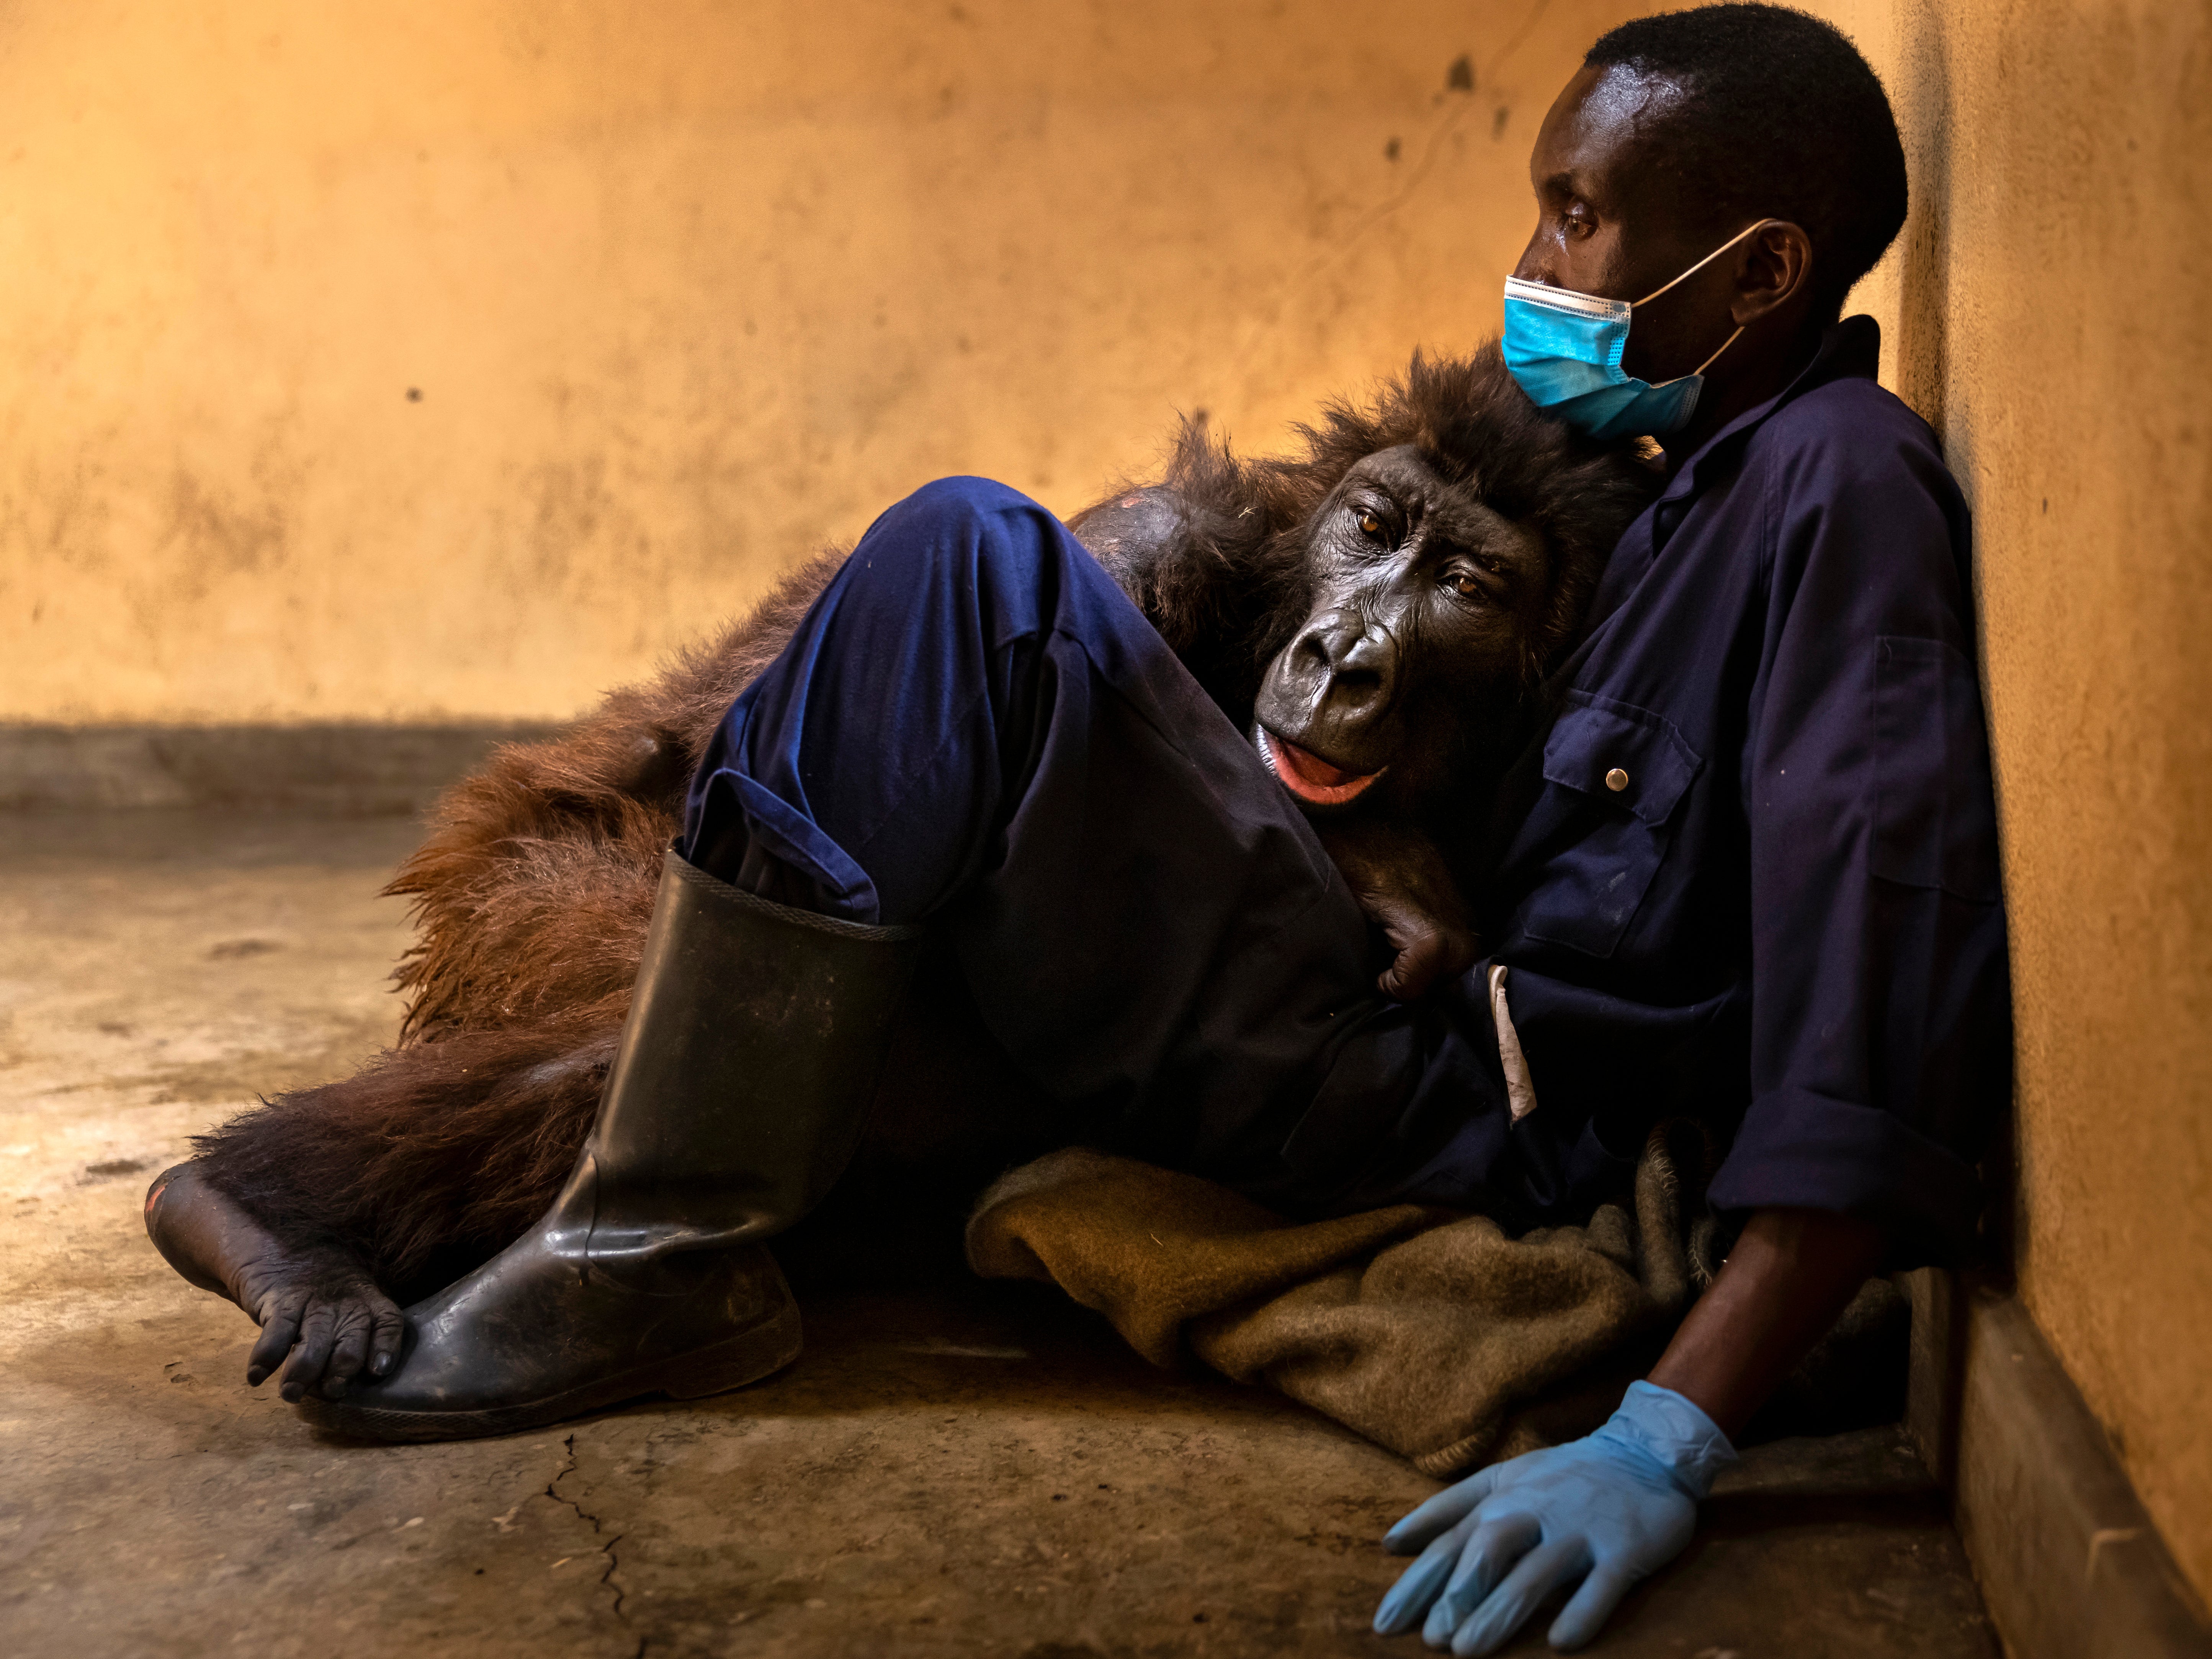 Orphaned mountain gorilla, Ndakasi, sits with her caregiver Andre Bauma days before her death on 26 September